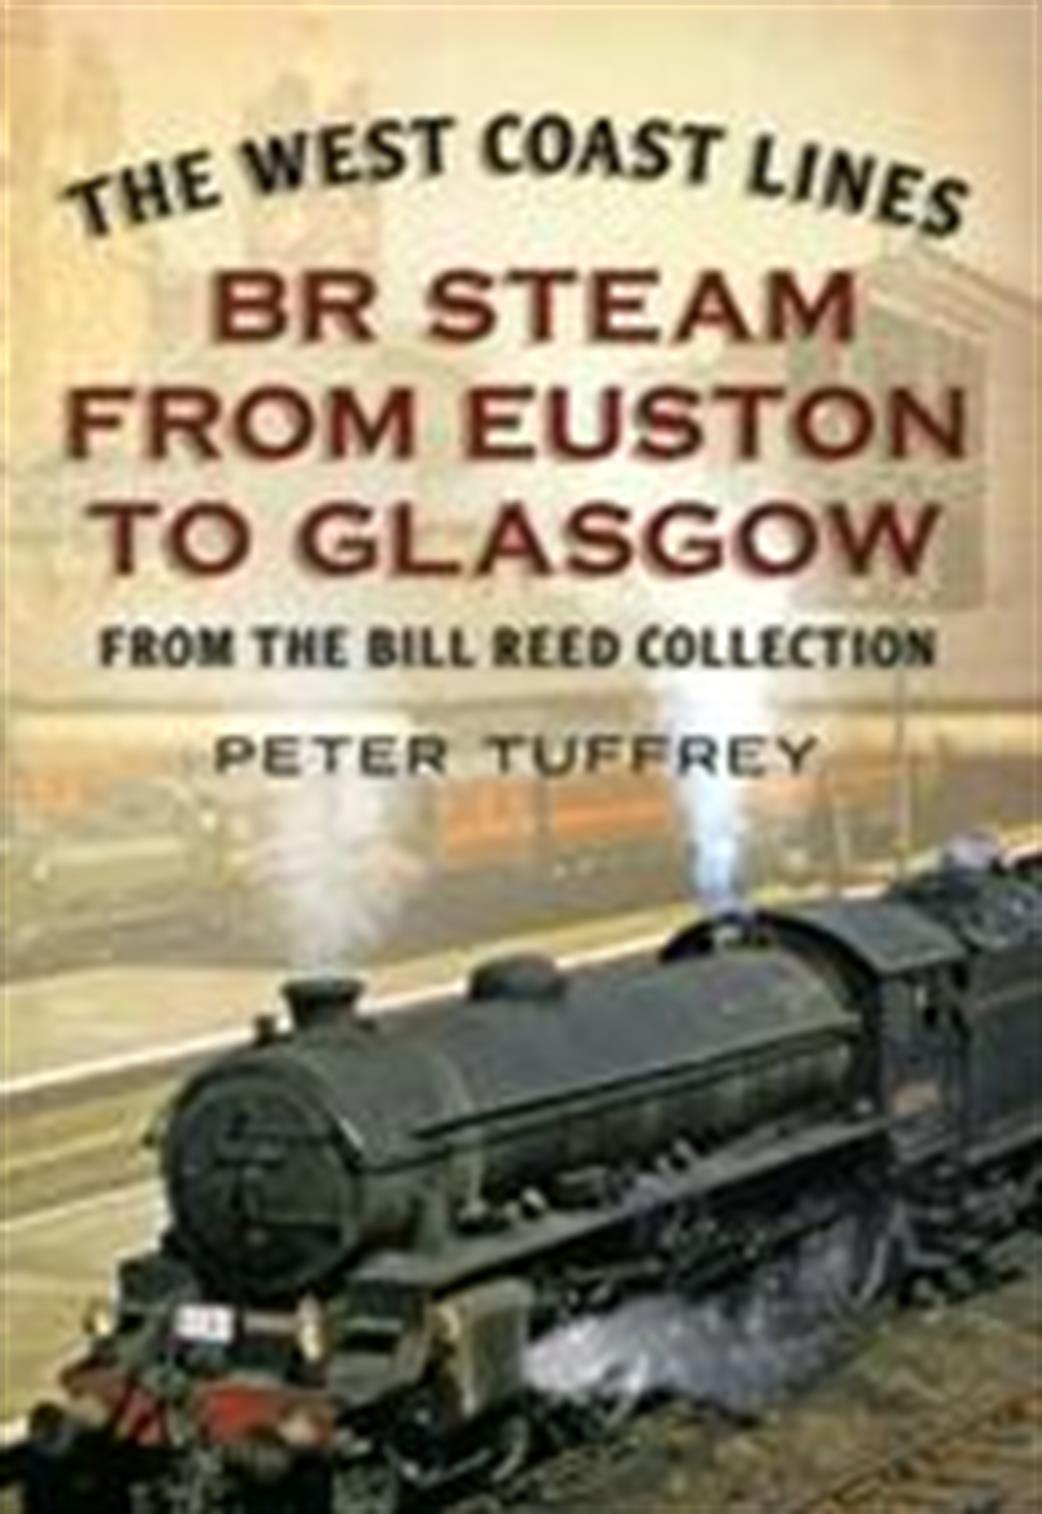 9781781552070 The West Coast Lines BR Steam From Euston to Glasgow by Peter Tuffrey